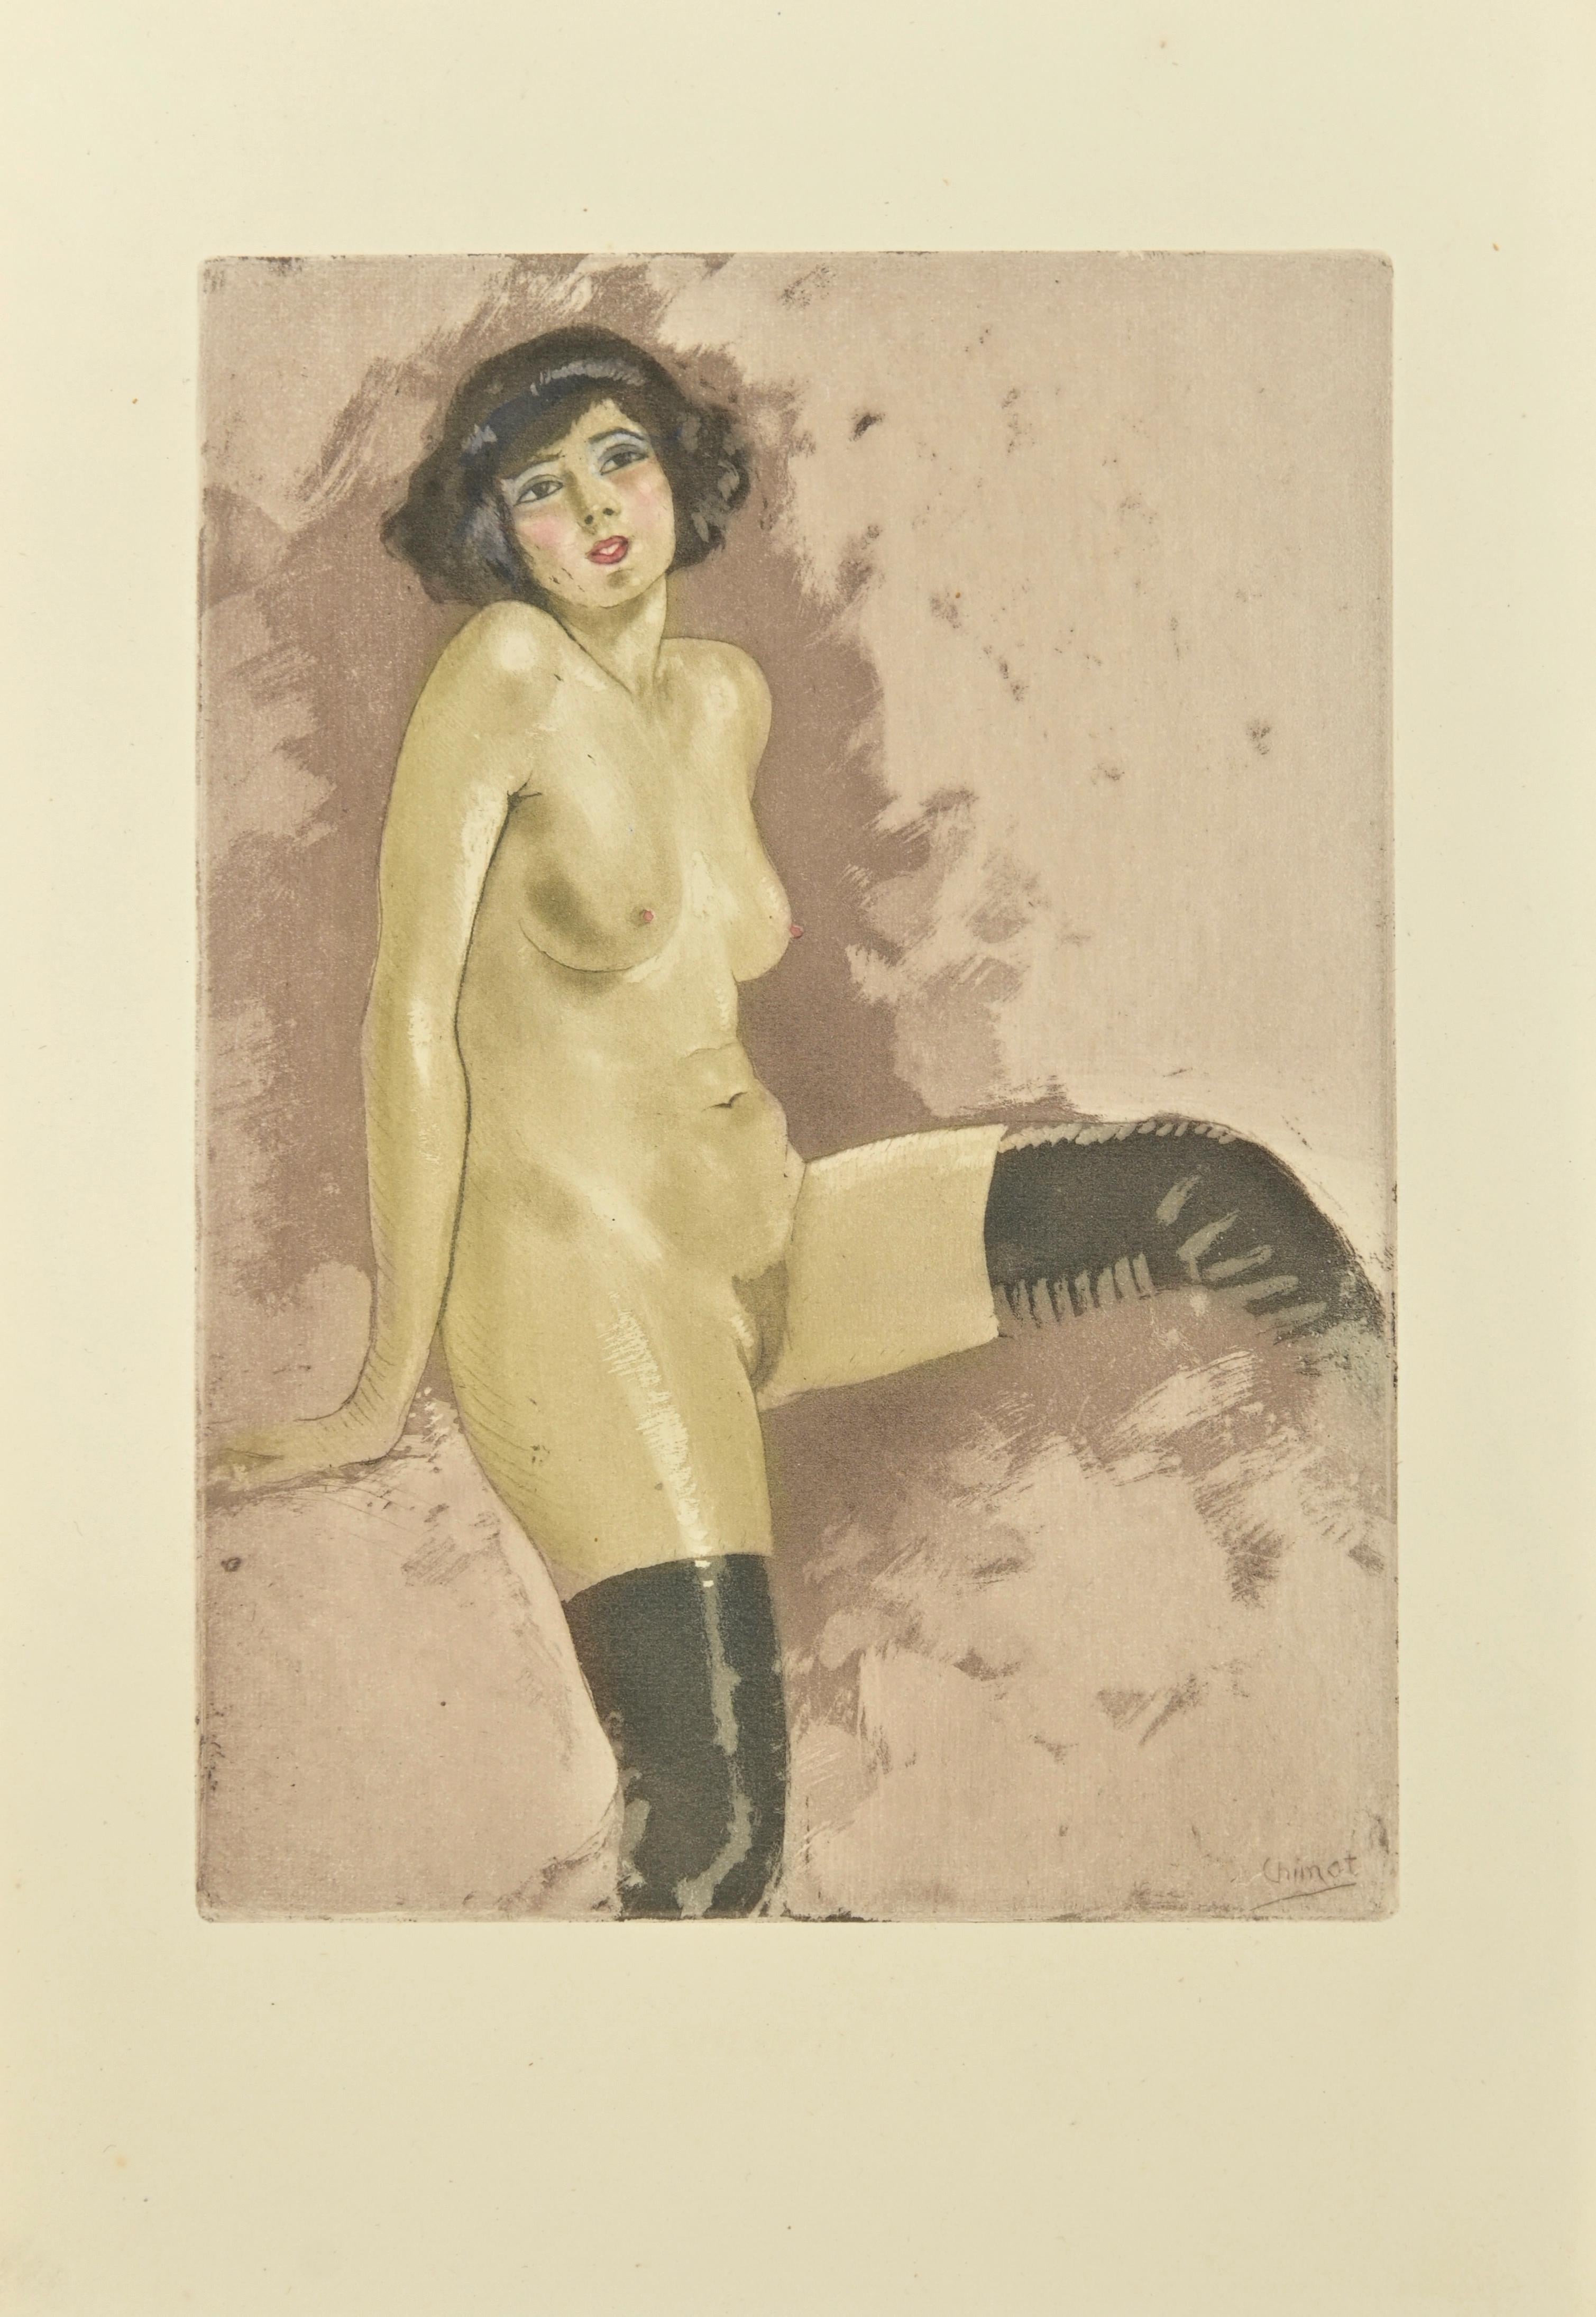 Nude with stockings is an etching realized by Edouard Chimot in the 1930s.

Signed on the plate by the artist on the lower right corner.

Good condition.

Édouard Chimot (26 November 1880 – 7 June 1959) was a French artist, illustrator, and editor